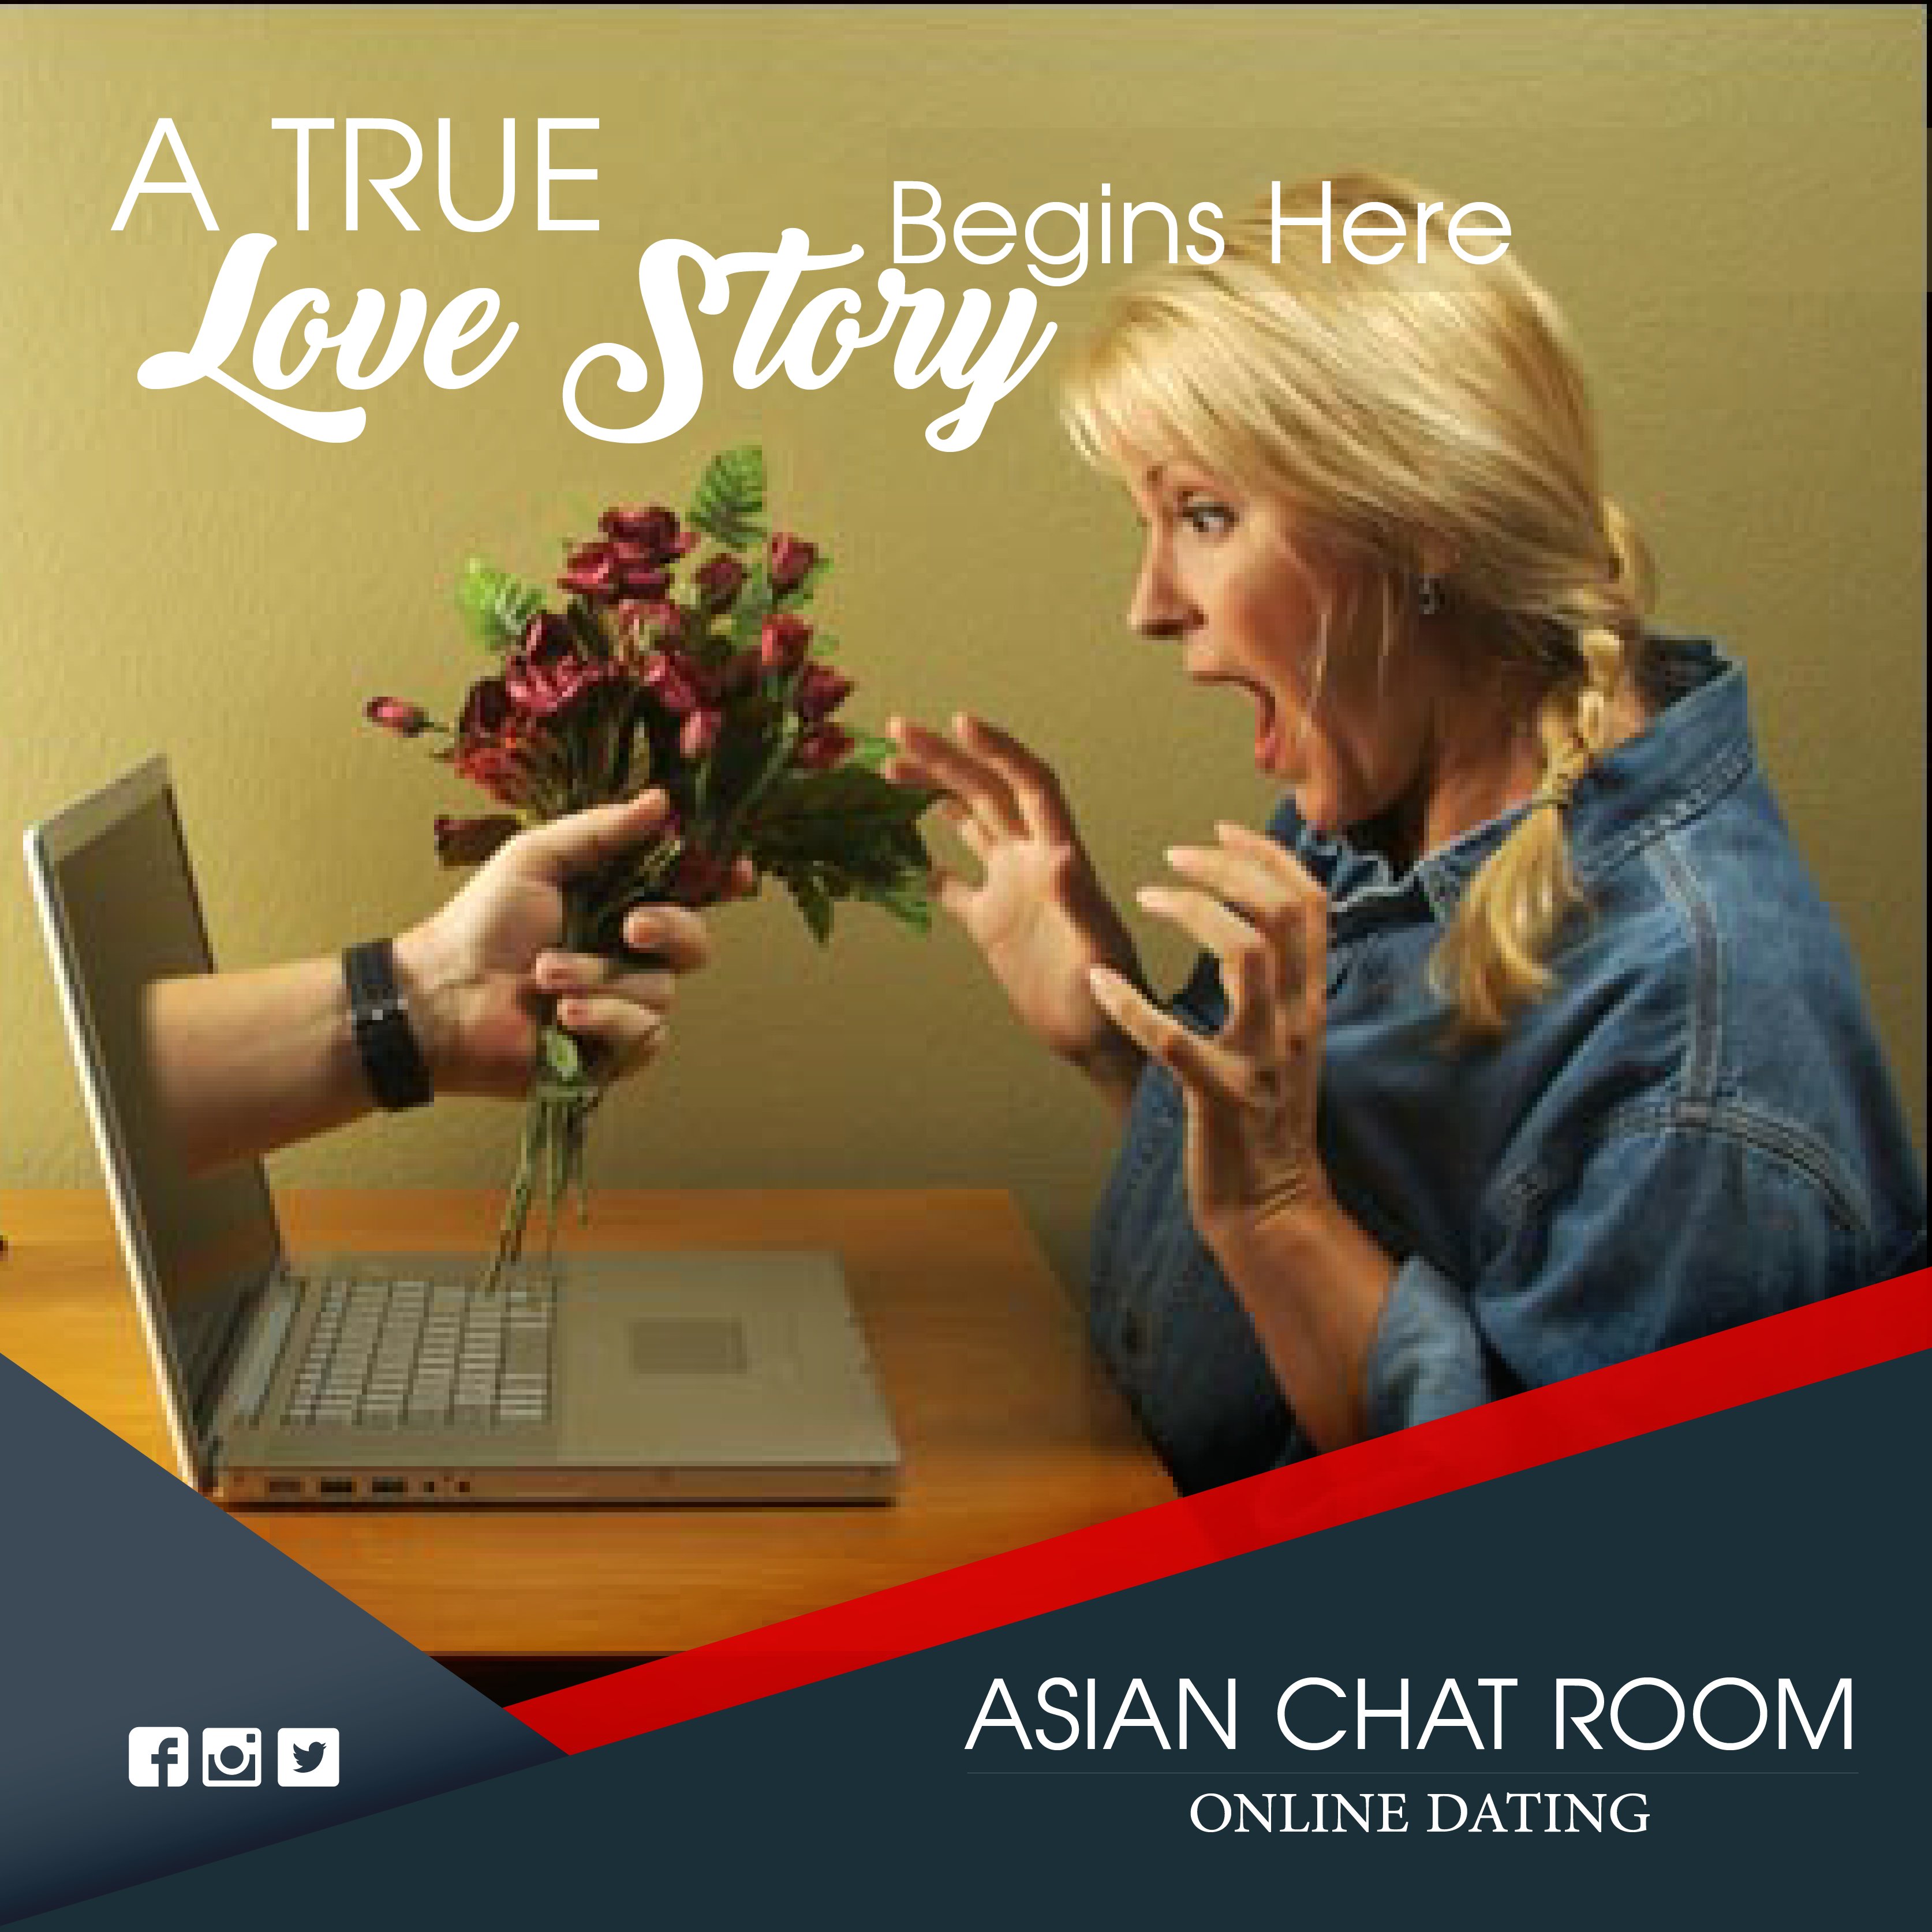 Asian chat rooms